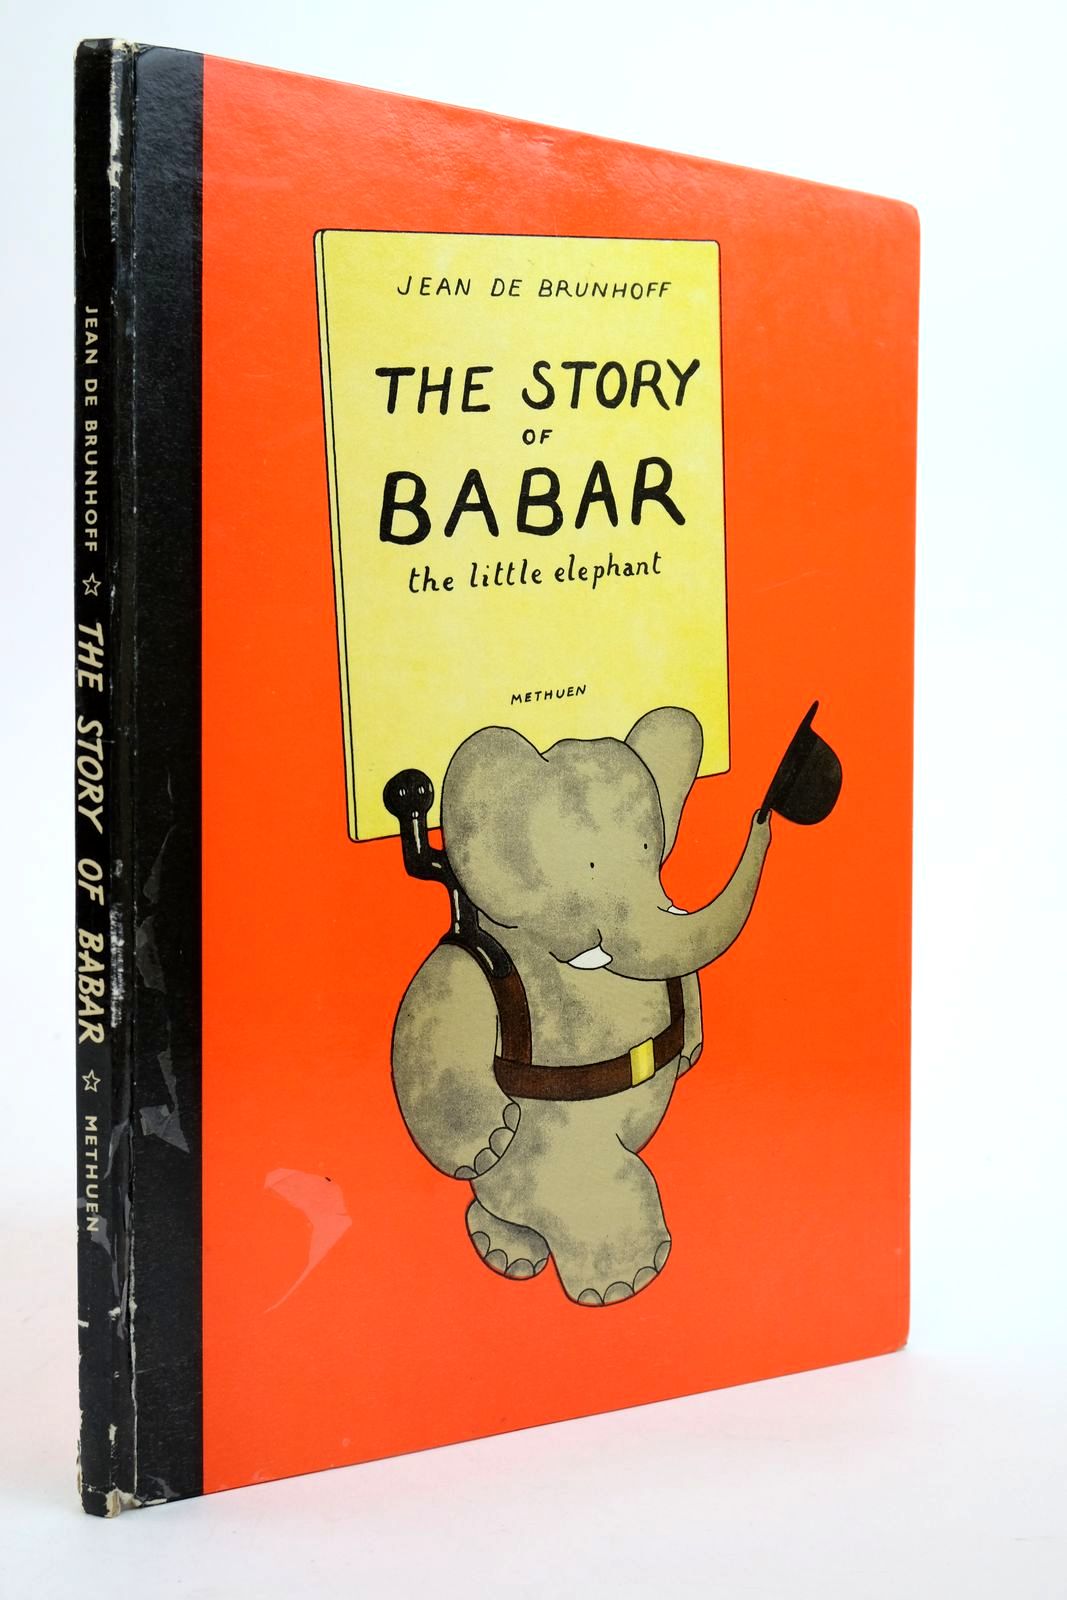 Photo of THE STORY OF BABAR THE LITTLE ELEPHANT written by De Brunhoff, Jean illustrated by De Brunhoff, Jean published by Methuen Children's Books (STOCK CODE: 2140107)  for sale by Stella & Rose's Books